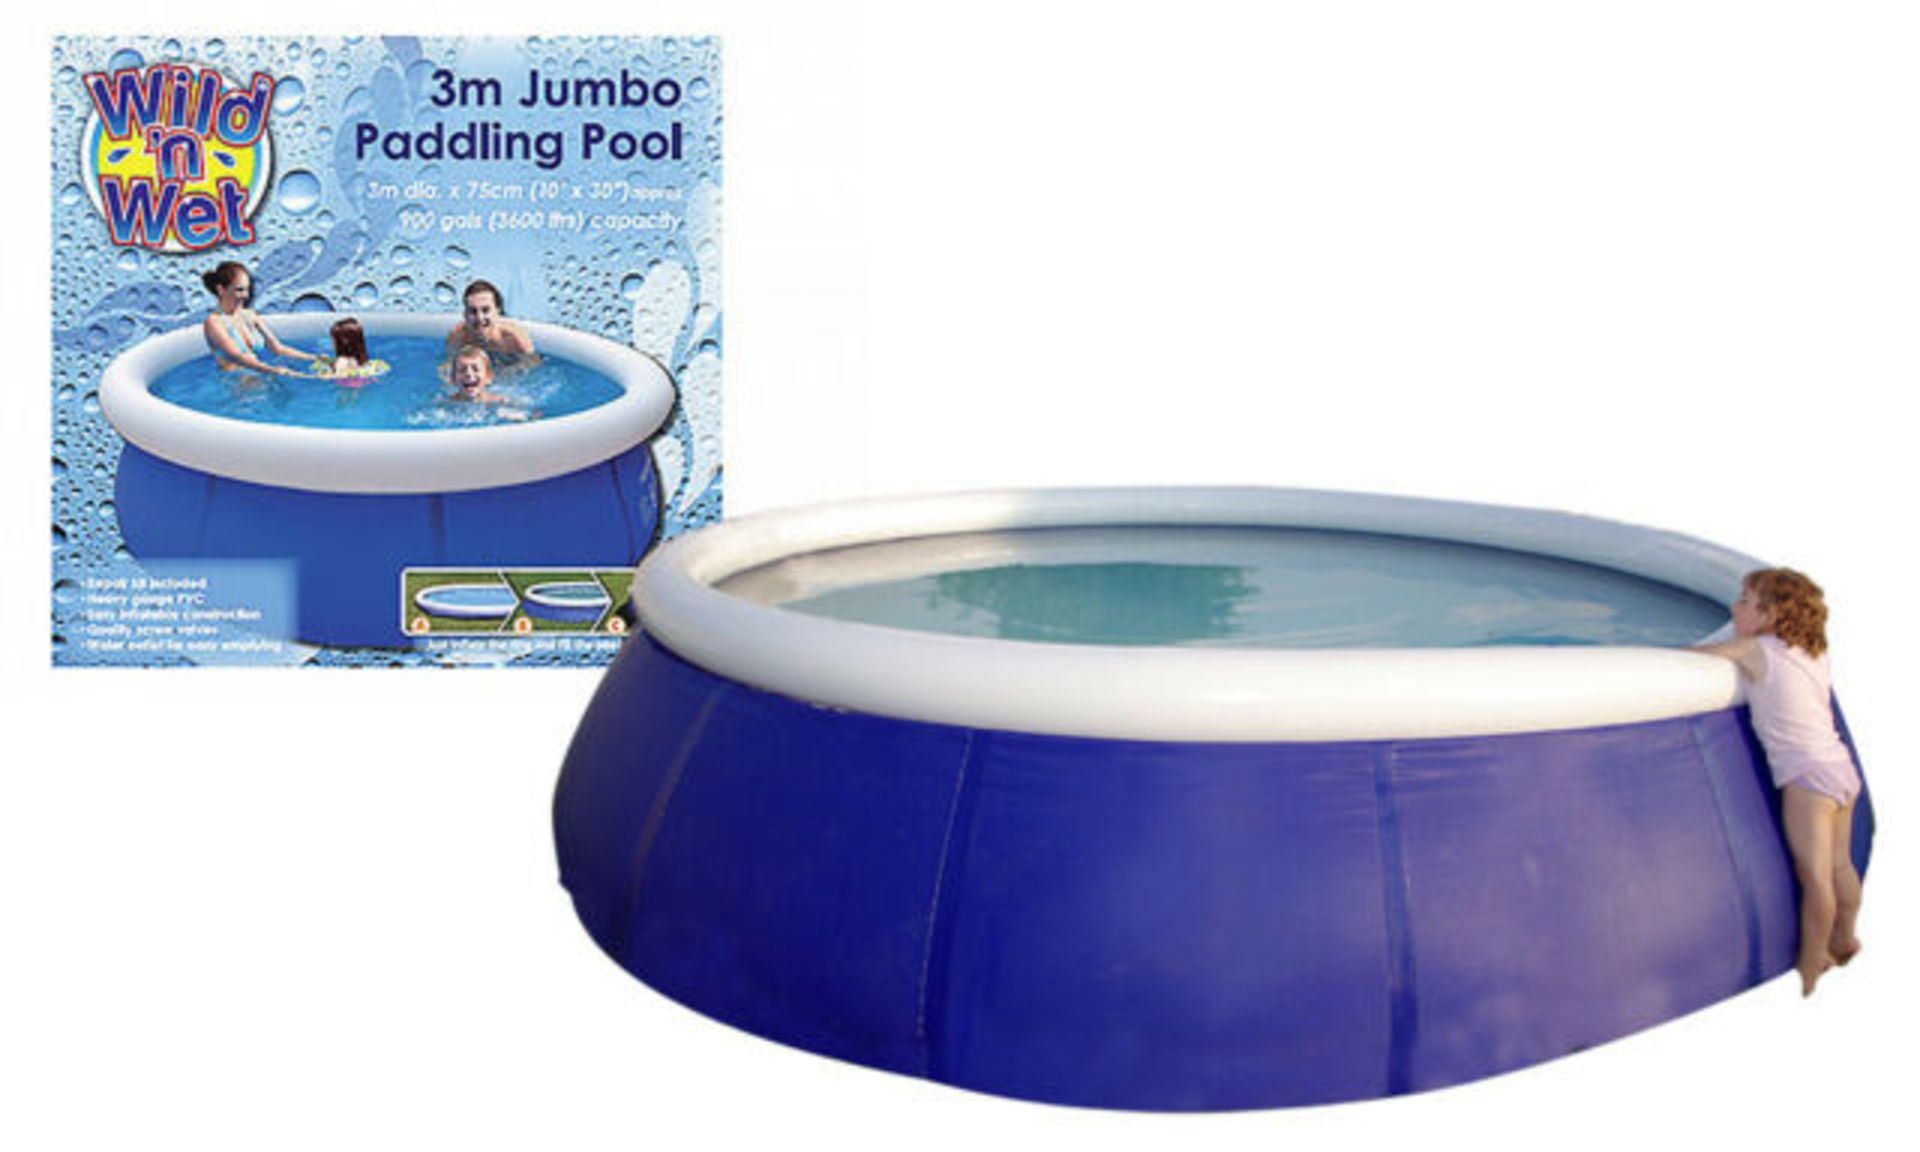 V Brand New 3m Jumbo Paddling Pool - Includes Repair Kit - Easy Inflatable Construction - Quality